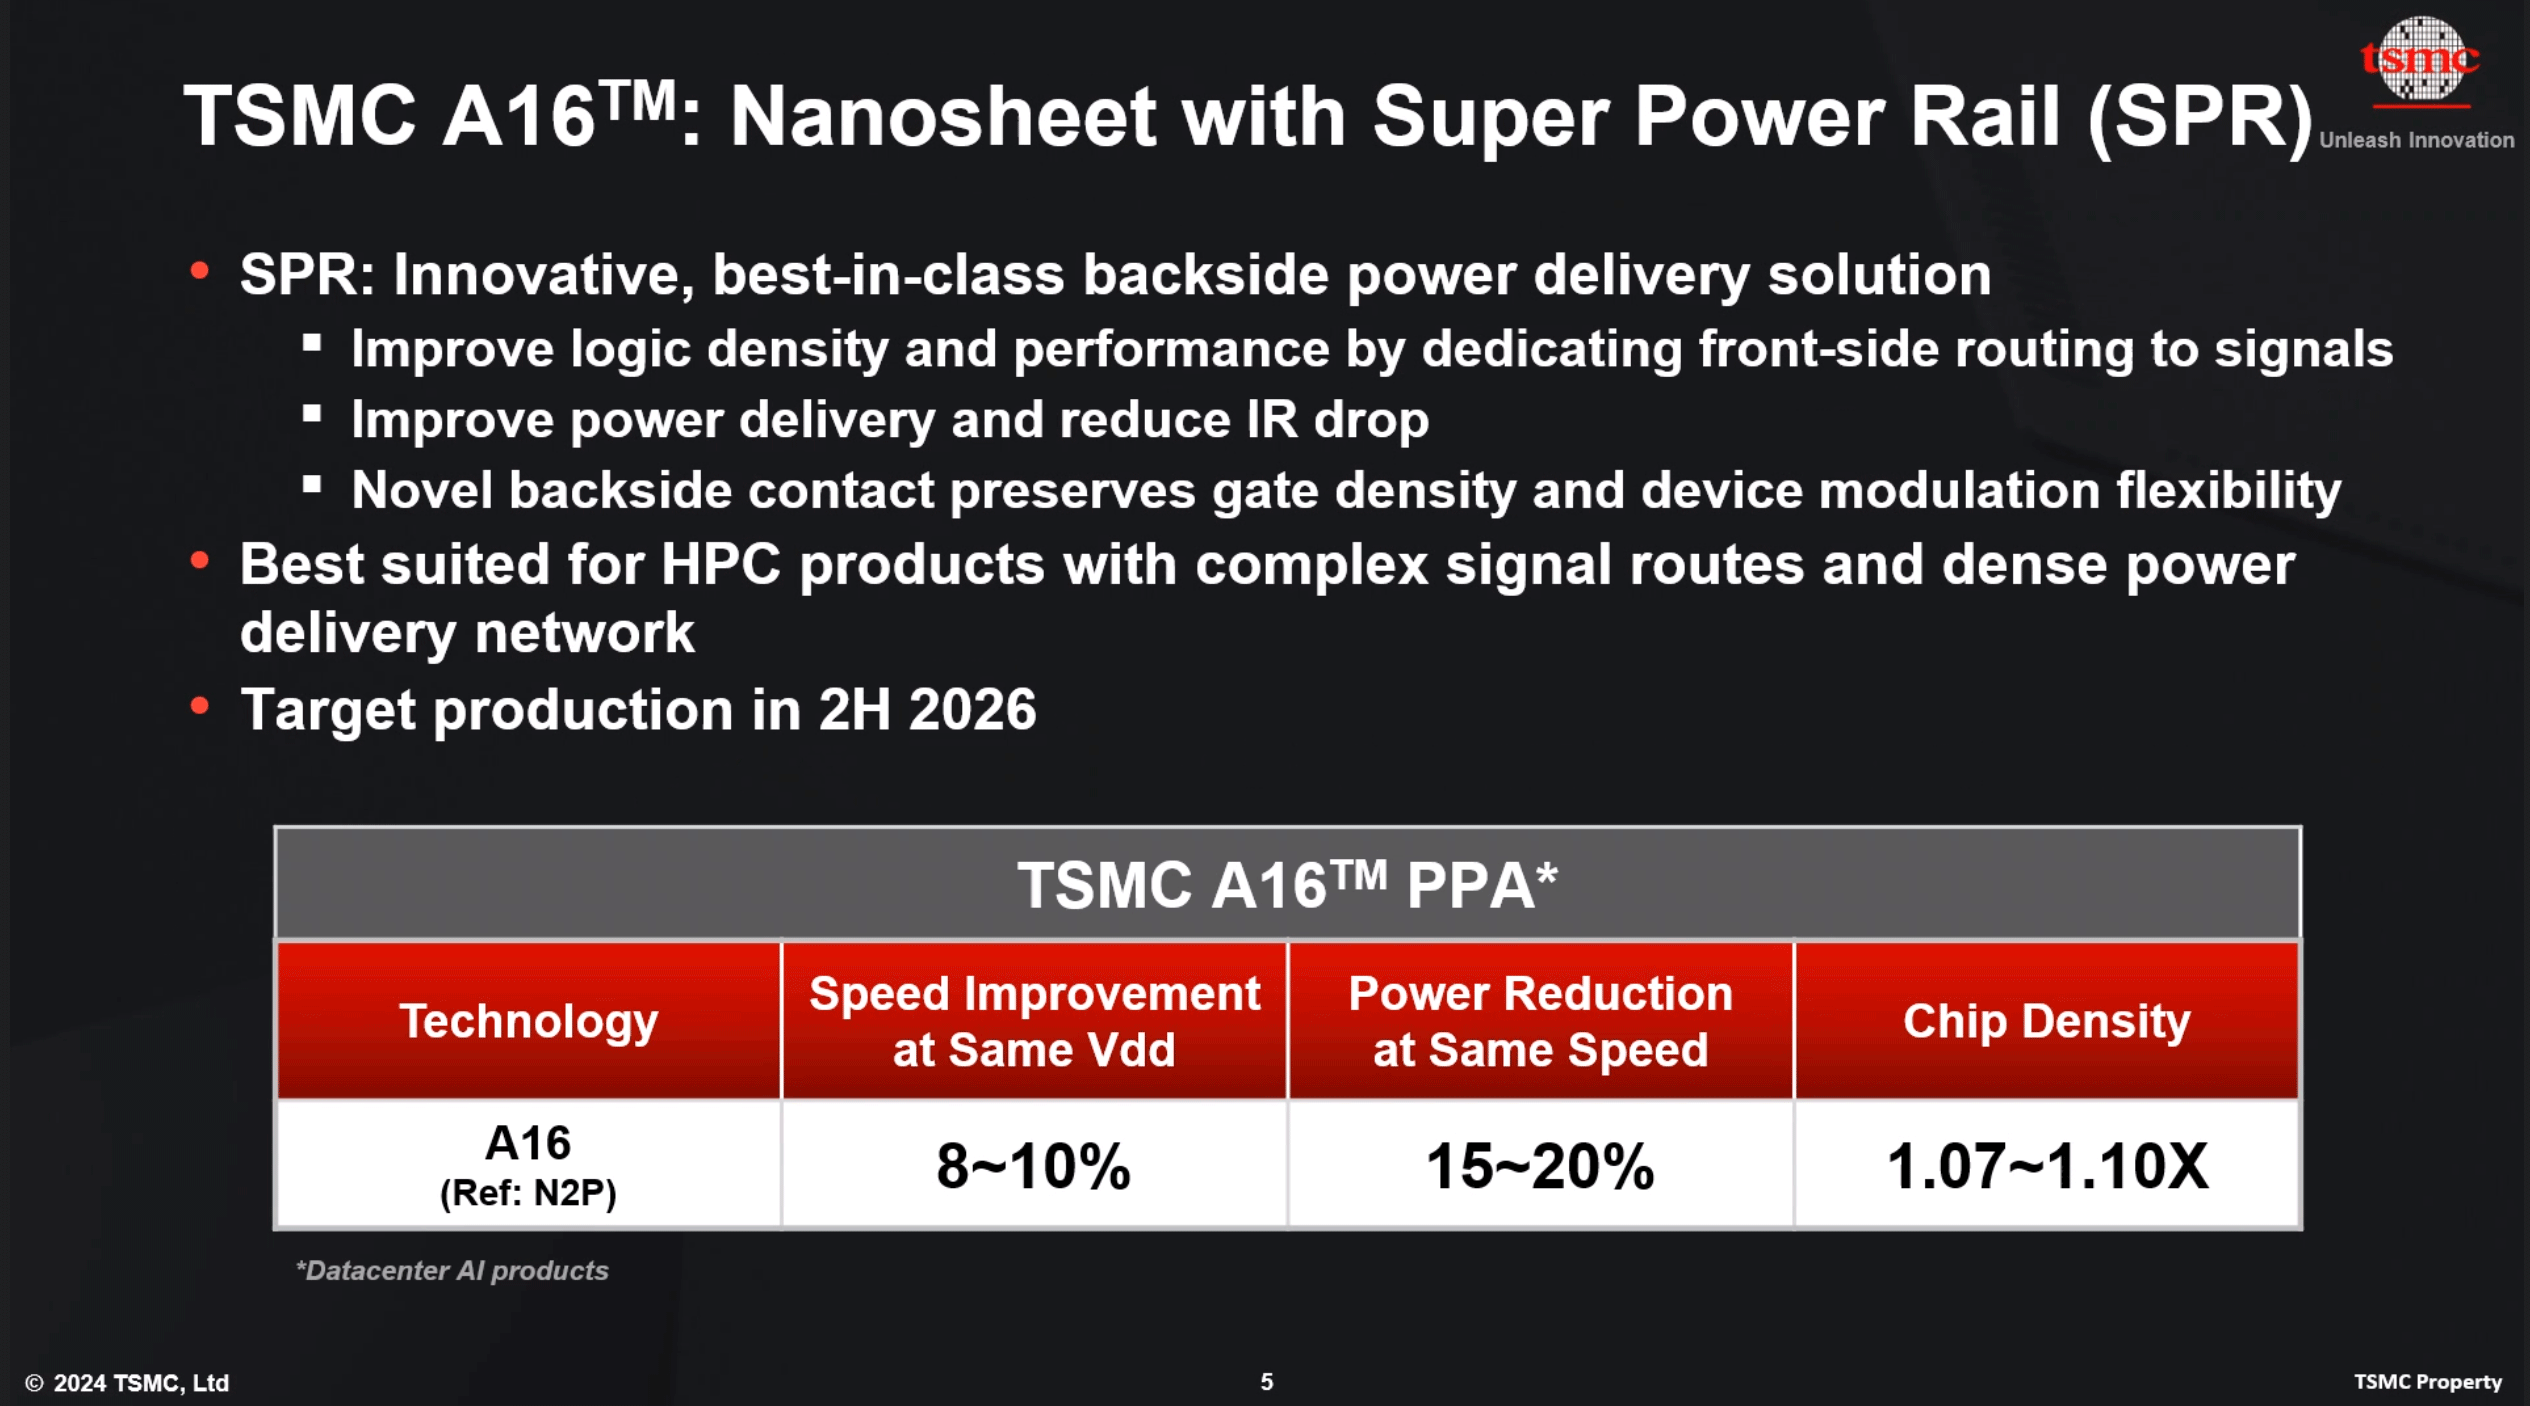 TSMC's 1.6nm Technology Announced for Late 2026: A16 with "Super Power Rail" Backside Power